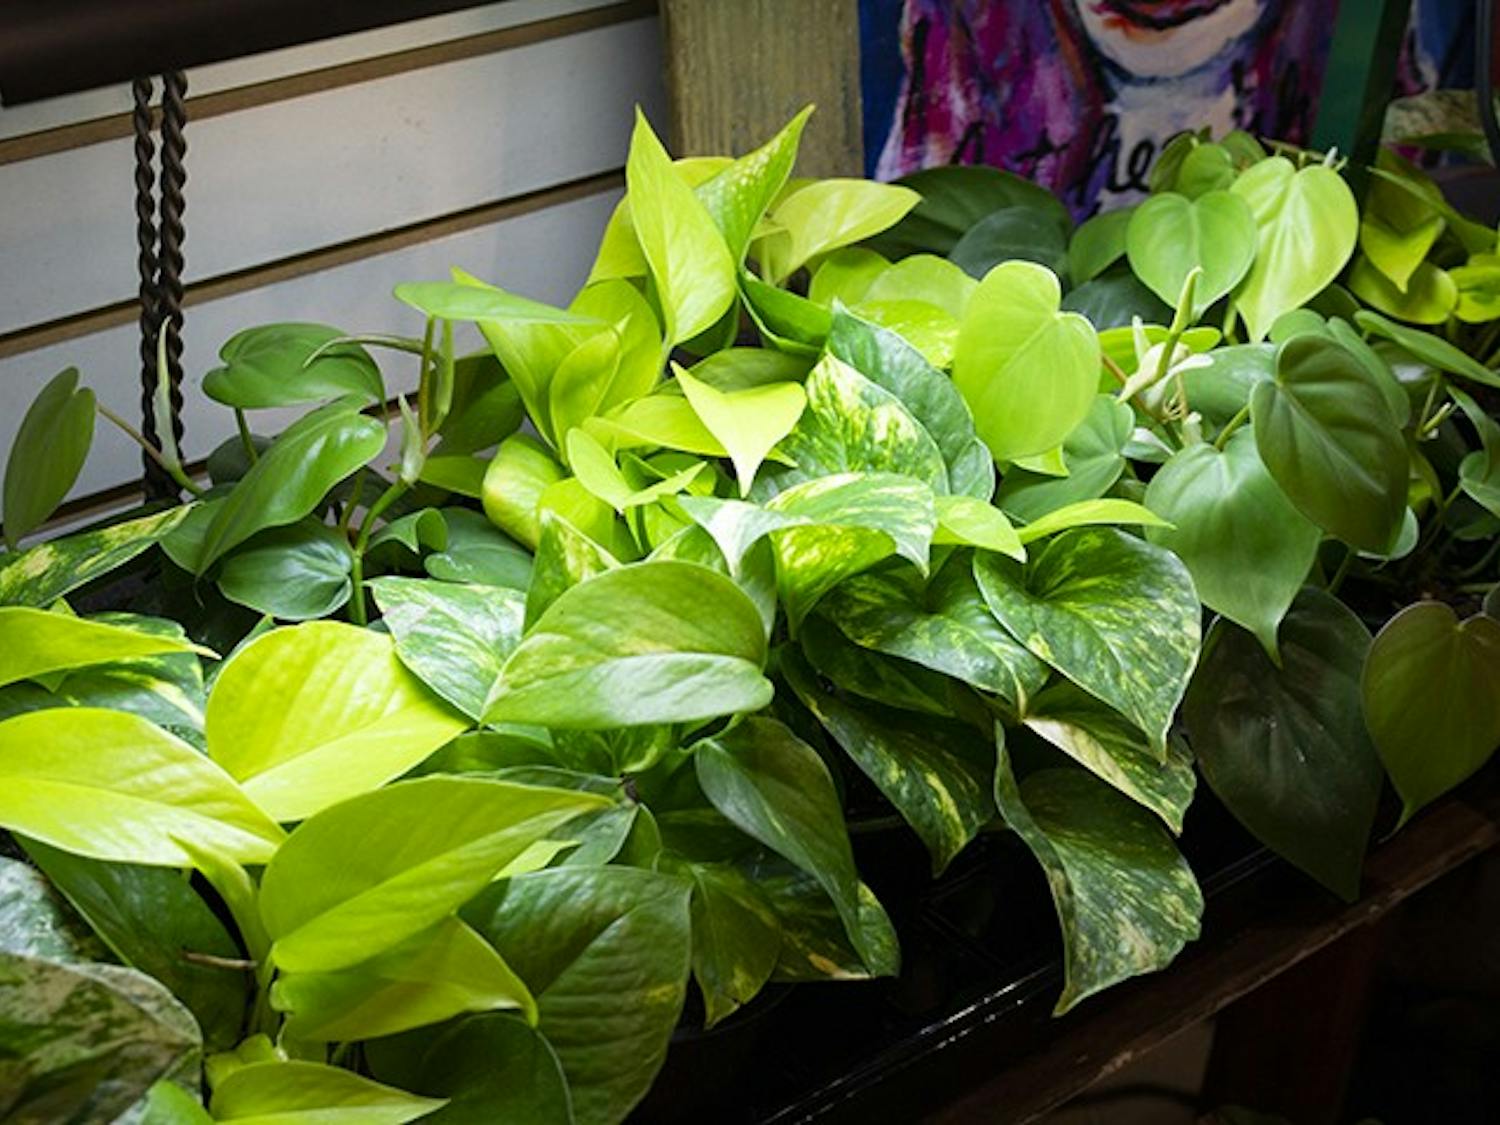 POTHOS- Epipremnum aureums, or pothos, are vining plants that are easy to care for. They tolerate most light conditions, and they require water at least once a week. They also droop when they need water, which owners should use as a guide.